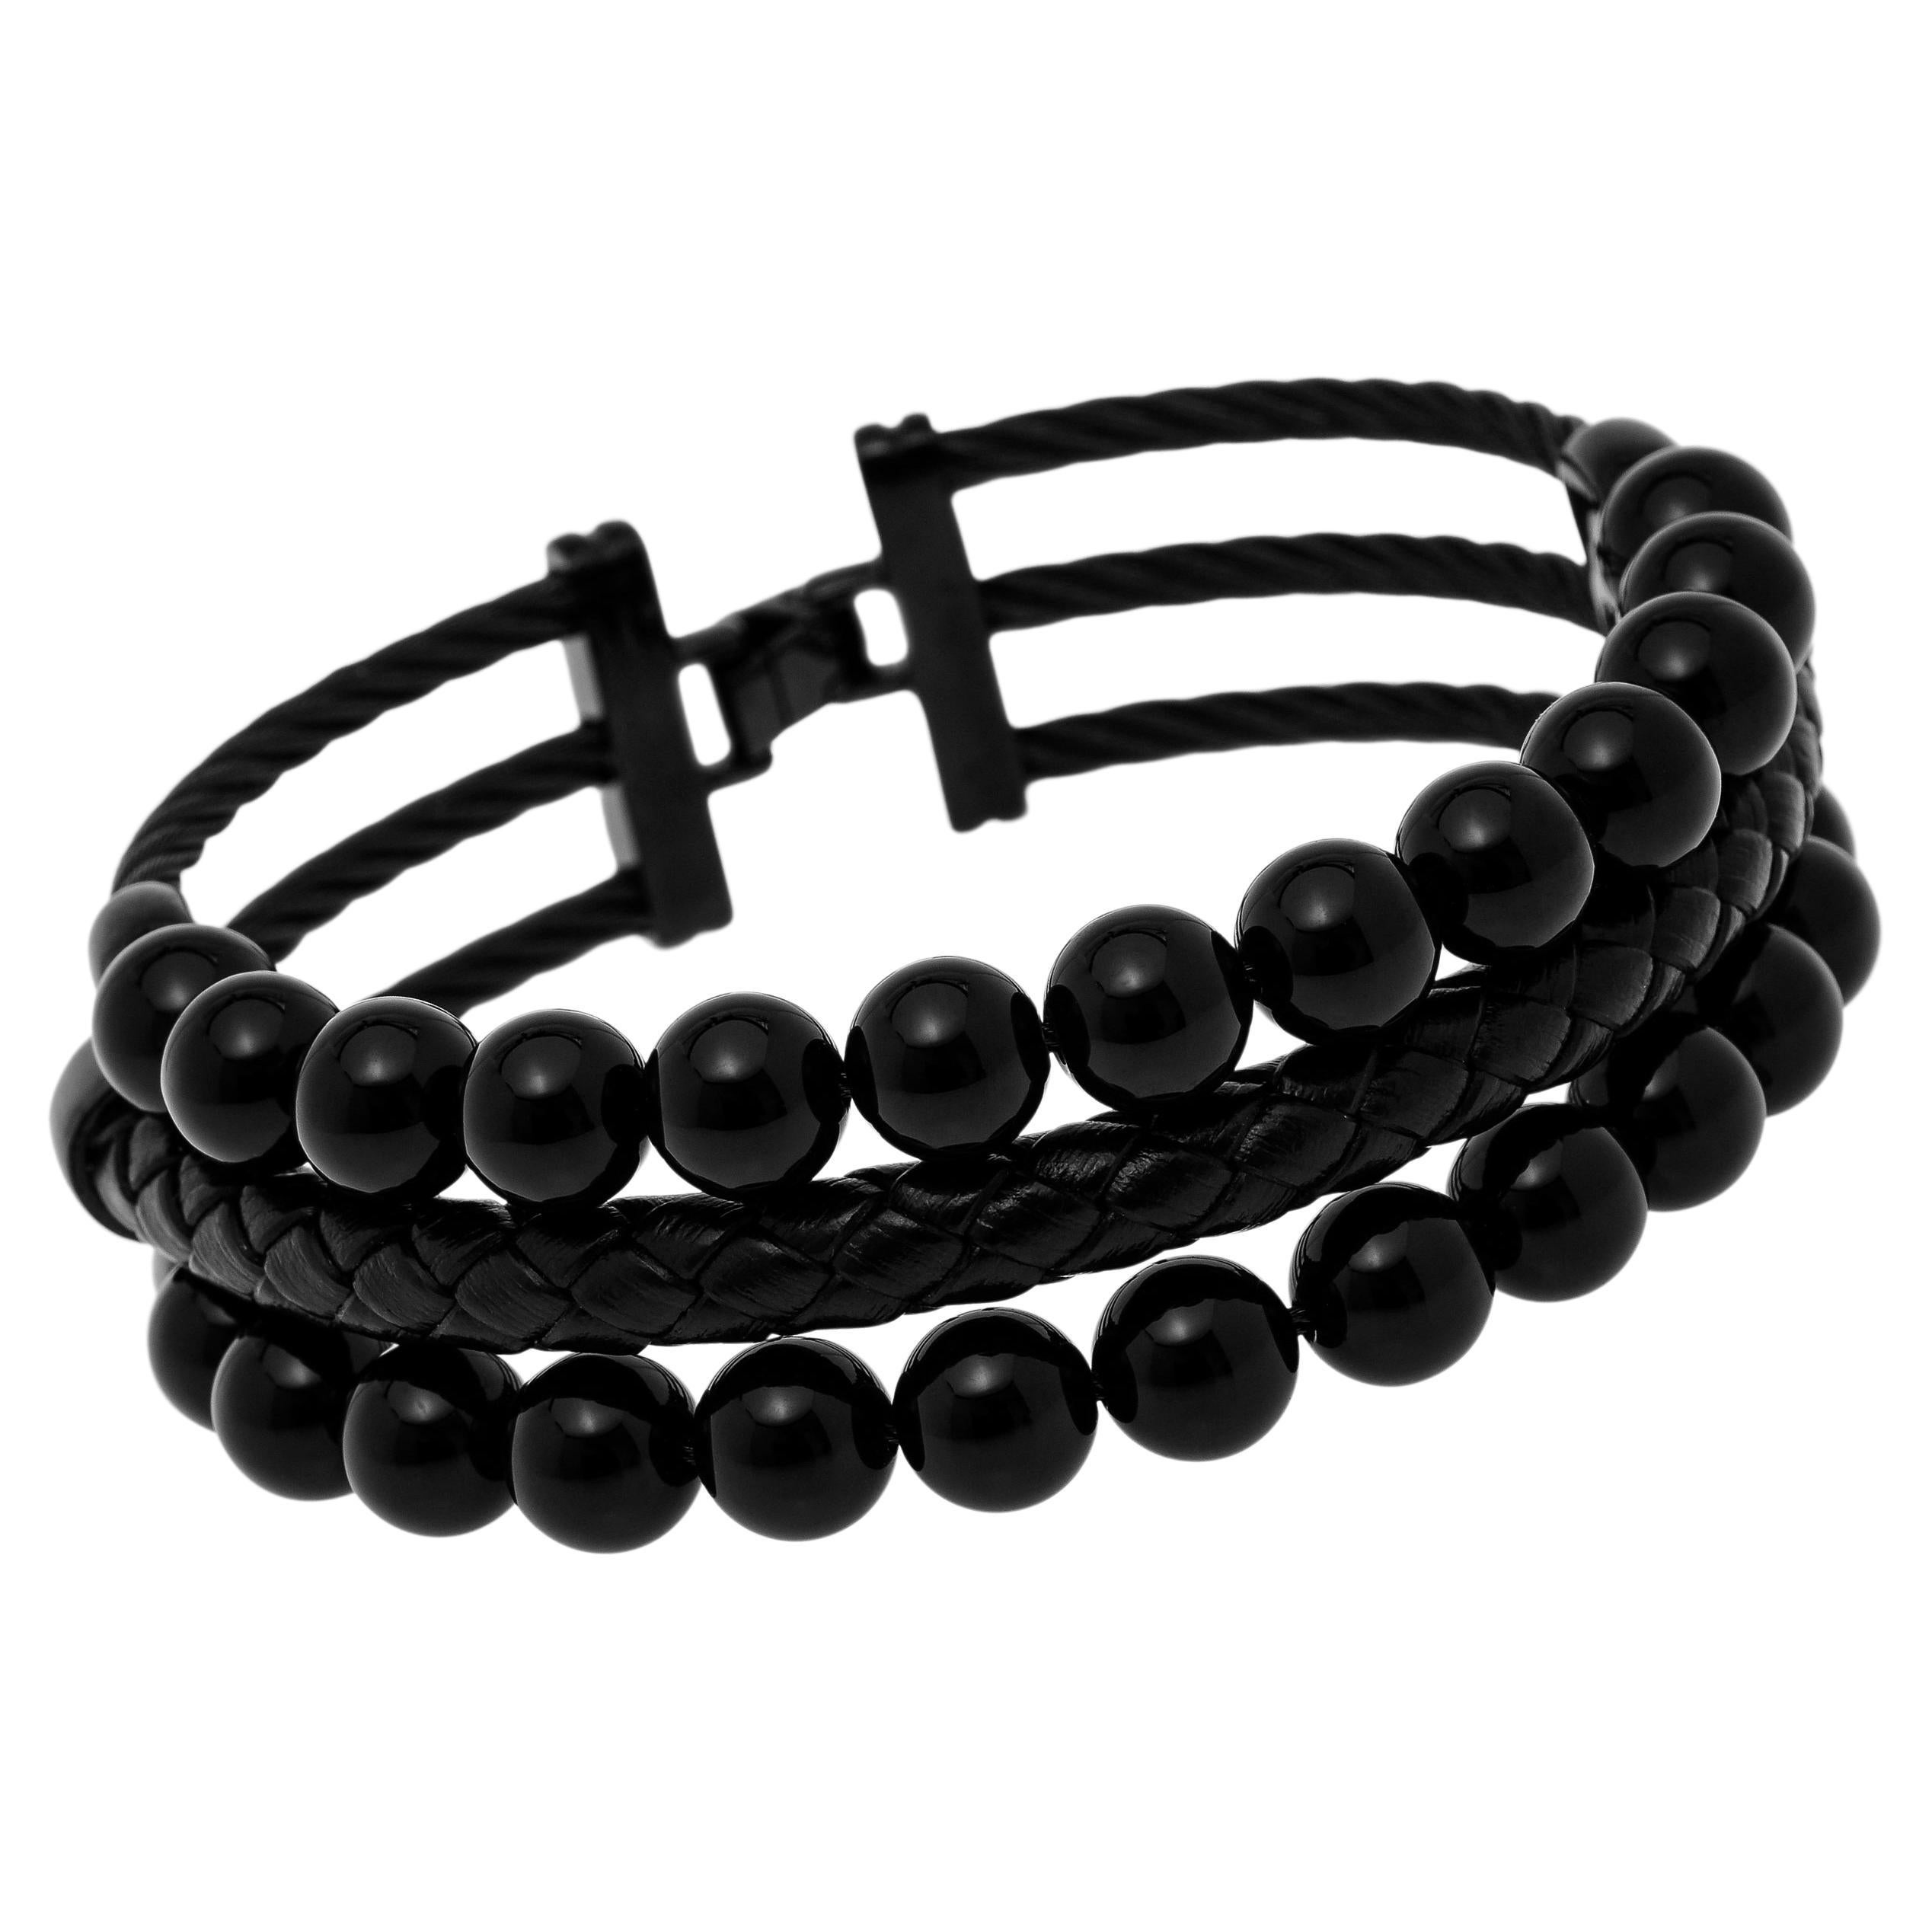 Alor Stainless Steel, Leather, And Onyx Bead Bracelet